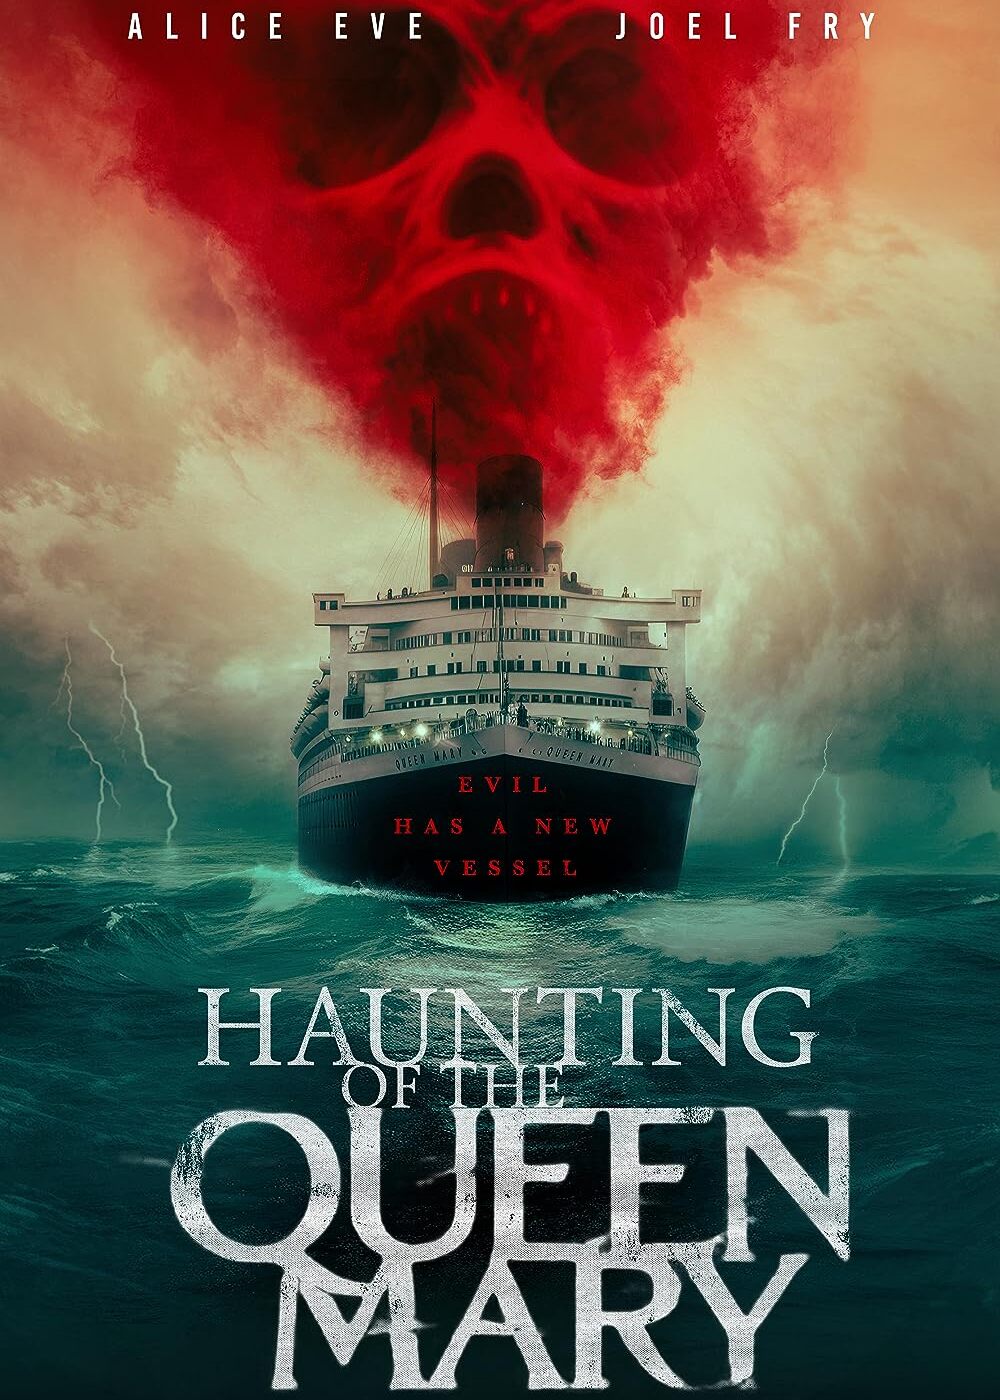 queen mary movie review